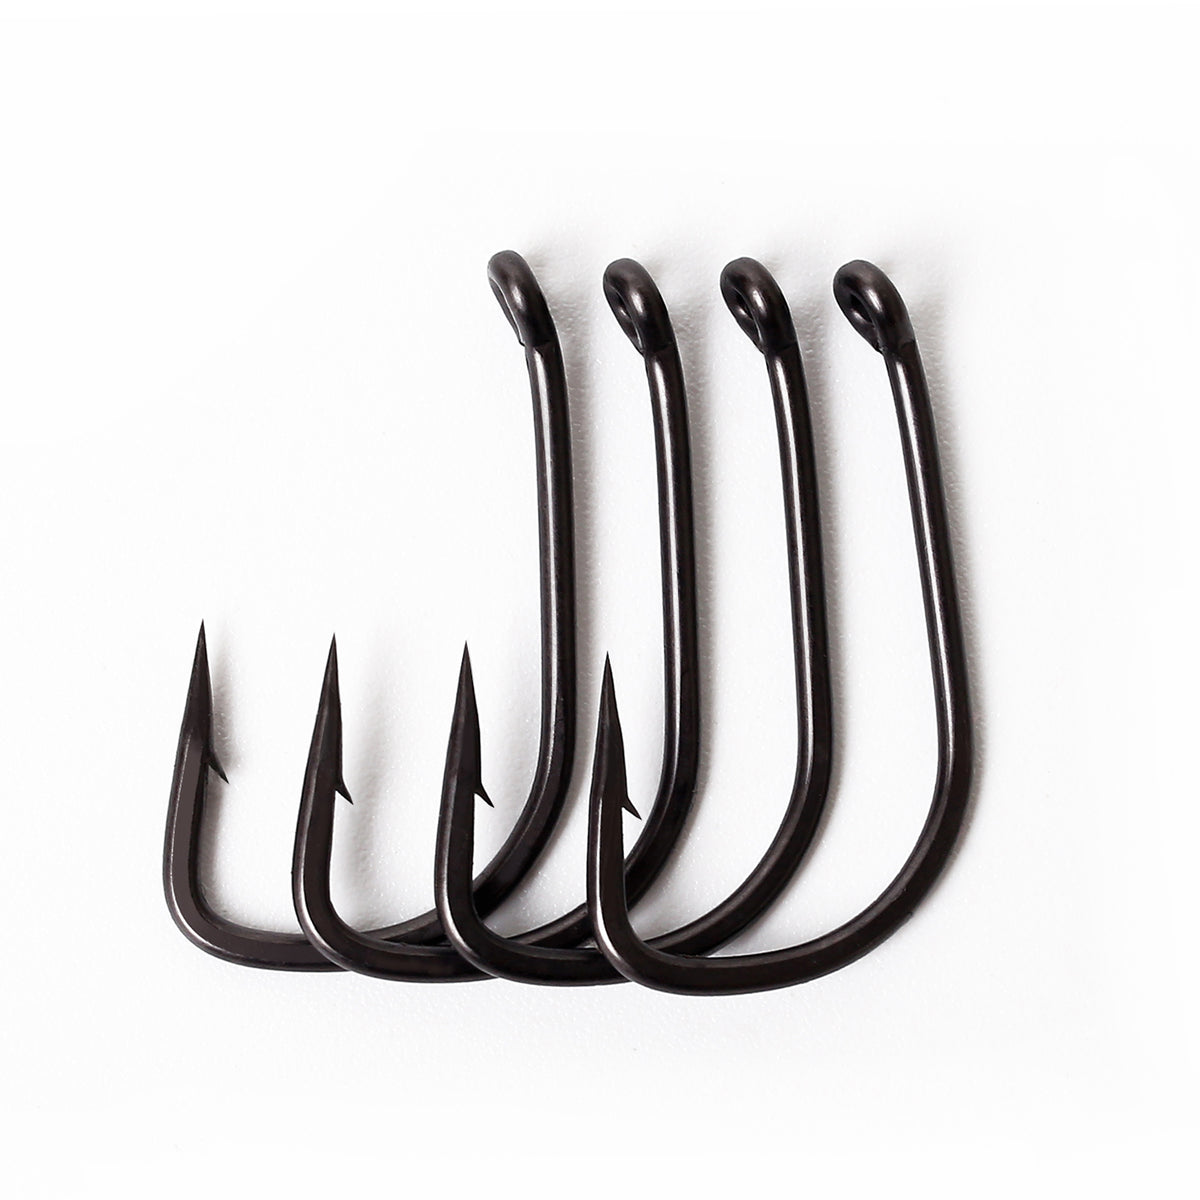 Coated Fishing Hooks for sale, Shop with Afterpay